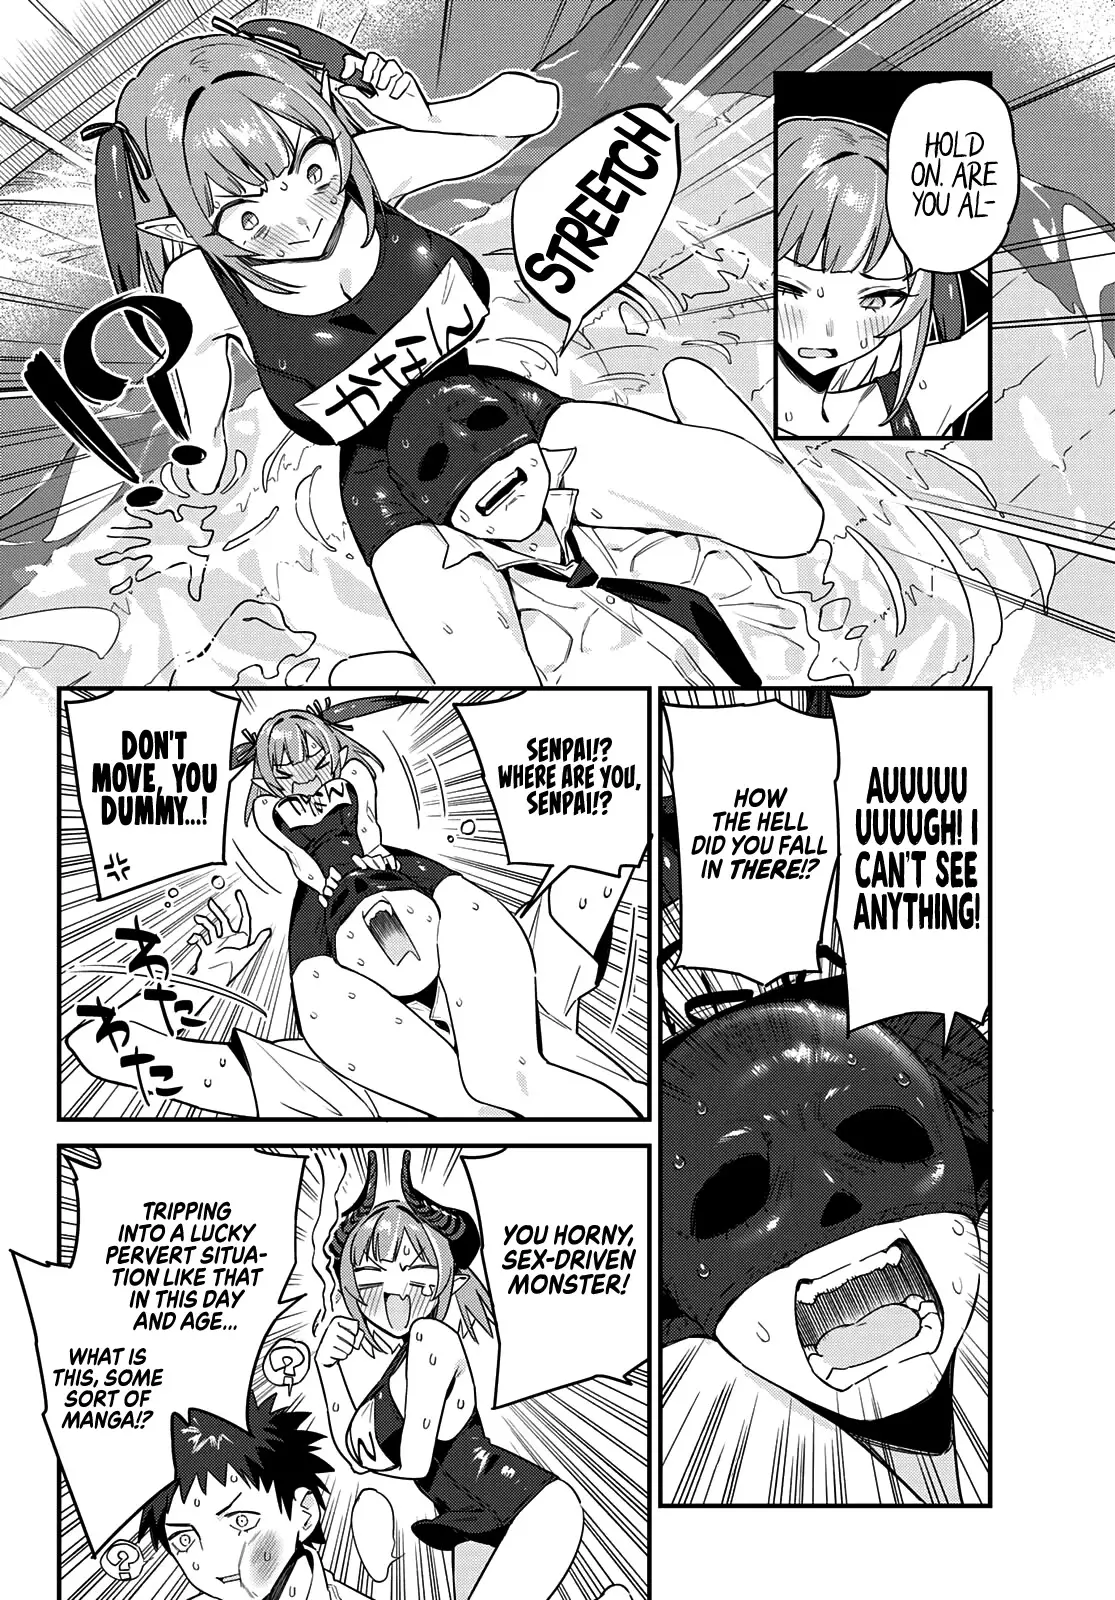 Kanan-Sama Is Easy As Hell! - 16 page 7-75990f8d